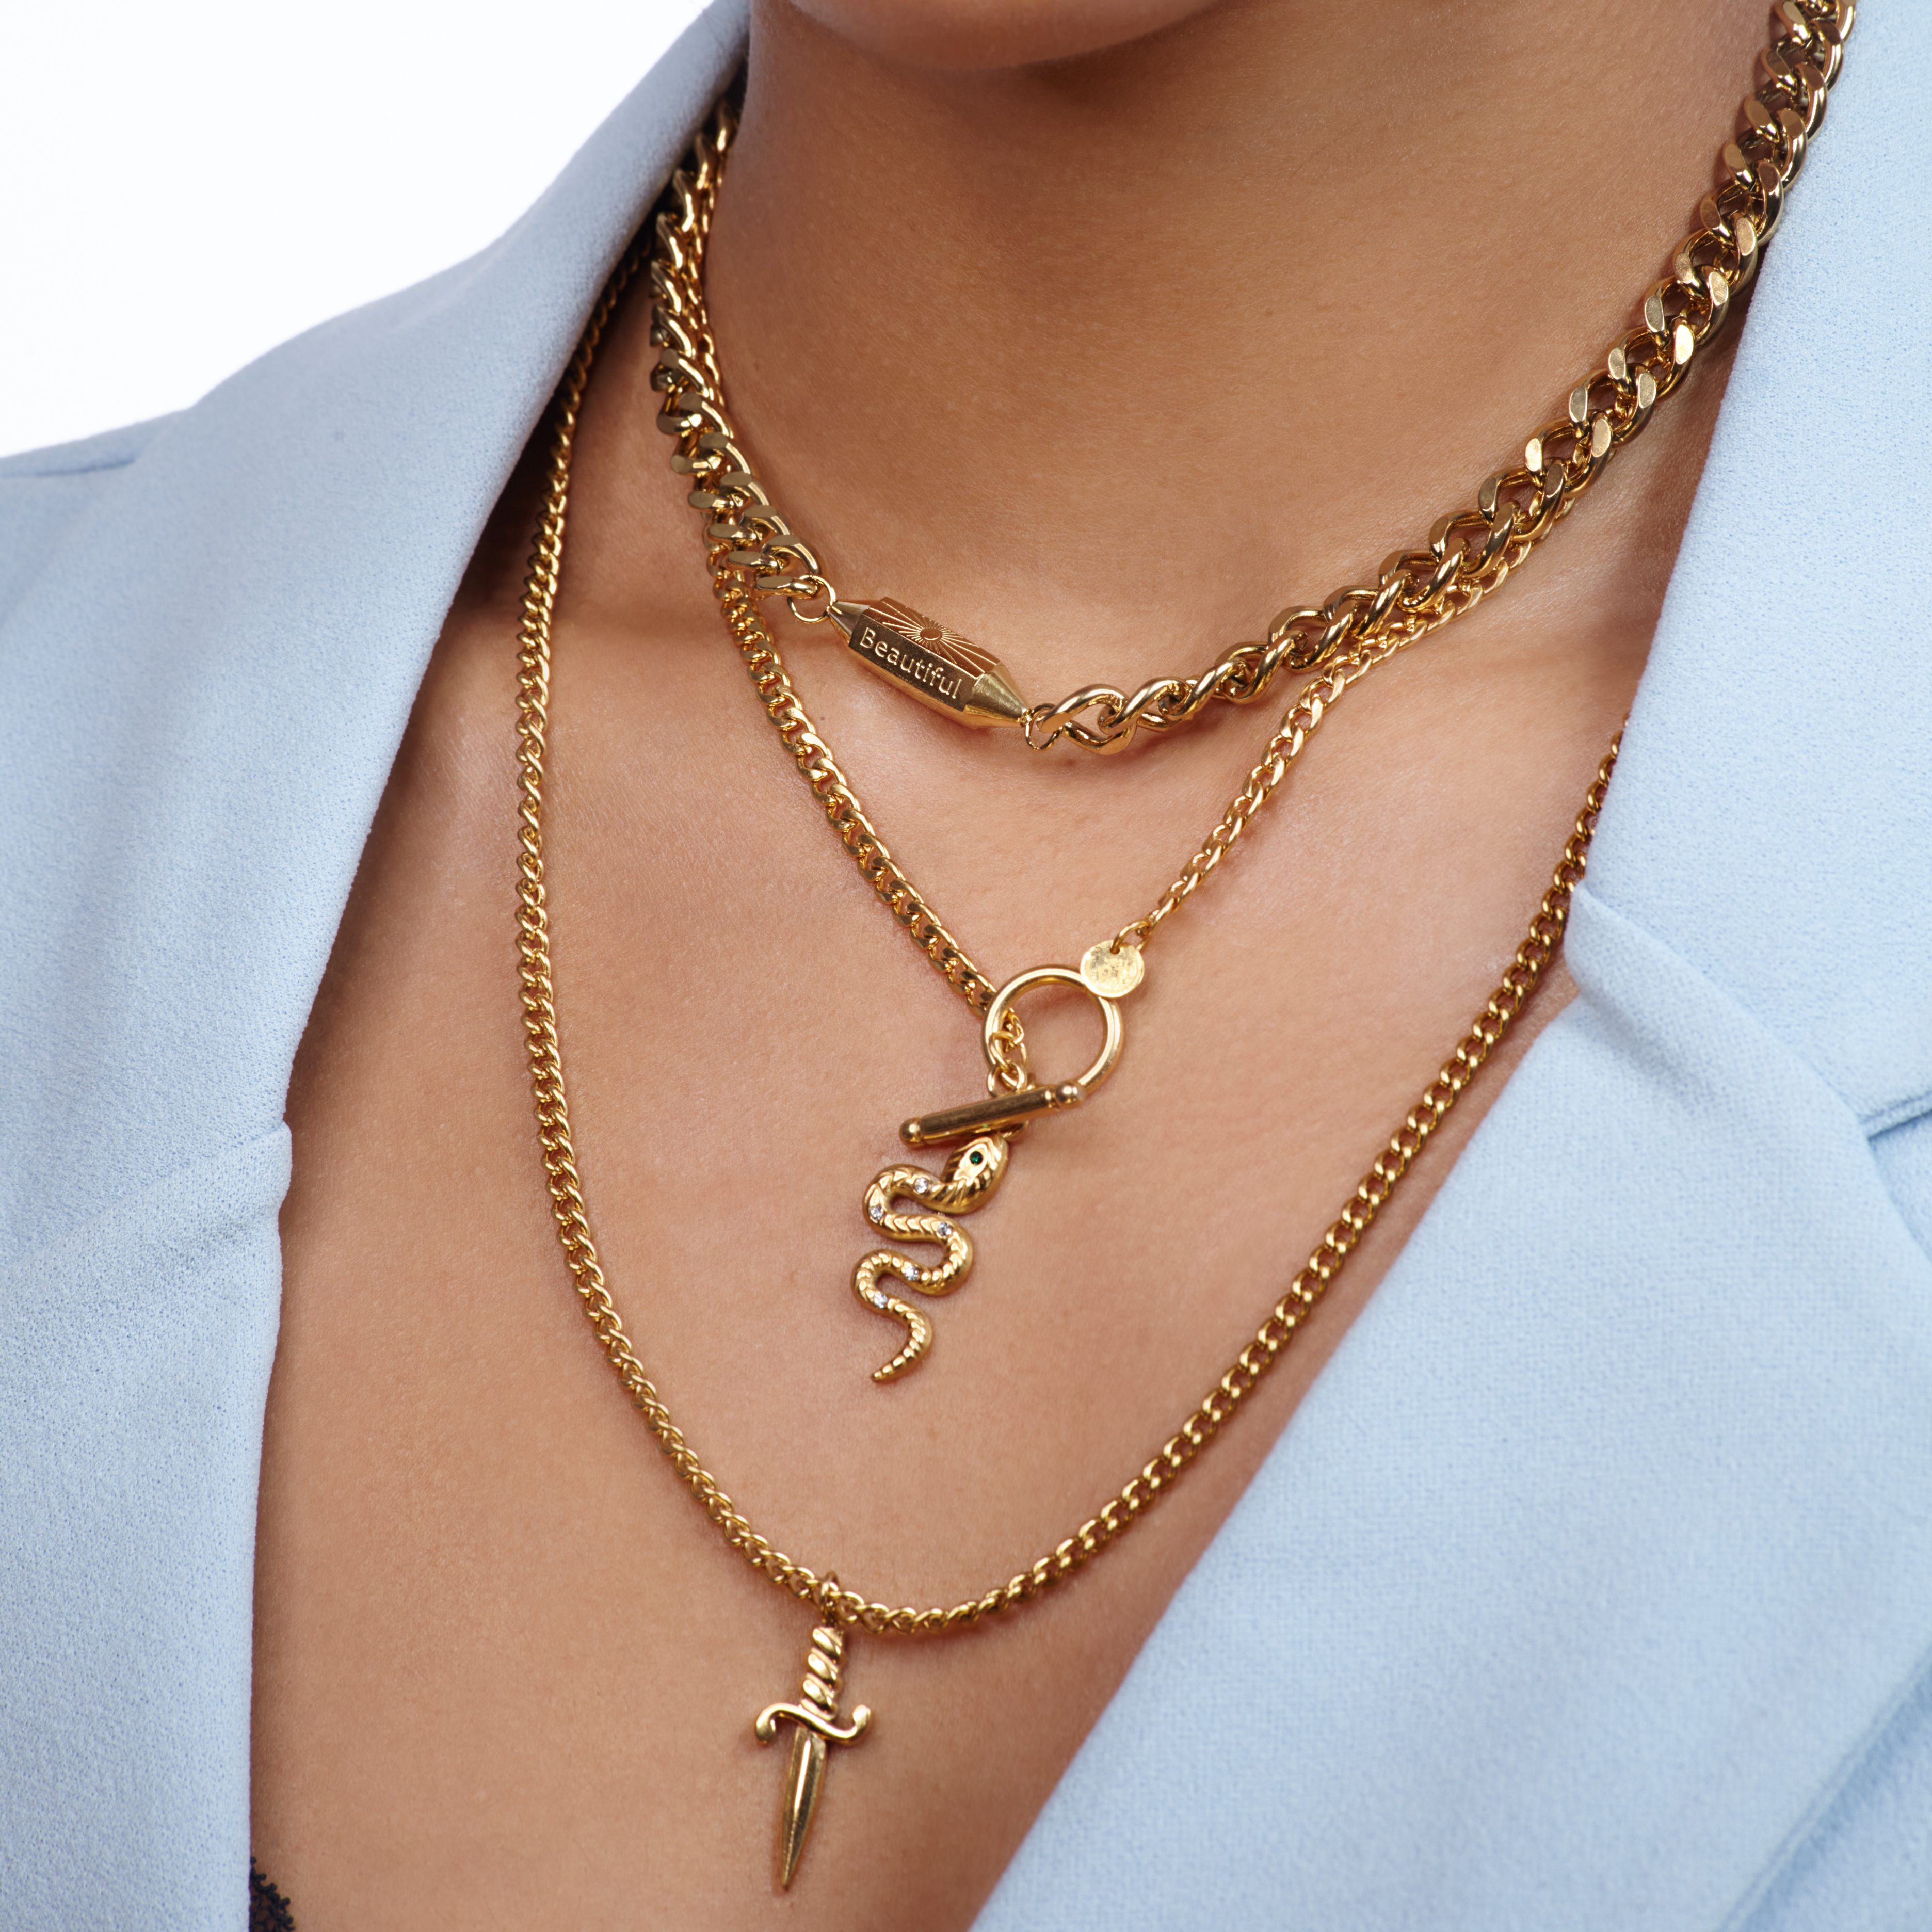 'Beautiful, Independent, Strong' Hexagon Chain Edelstahl Kette